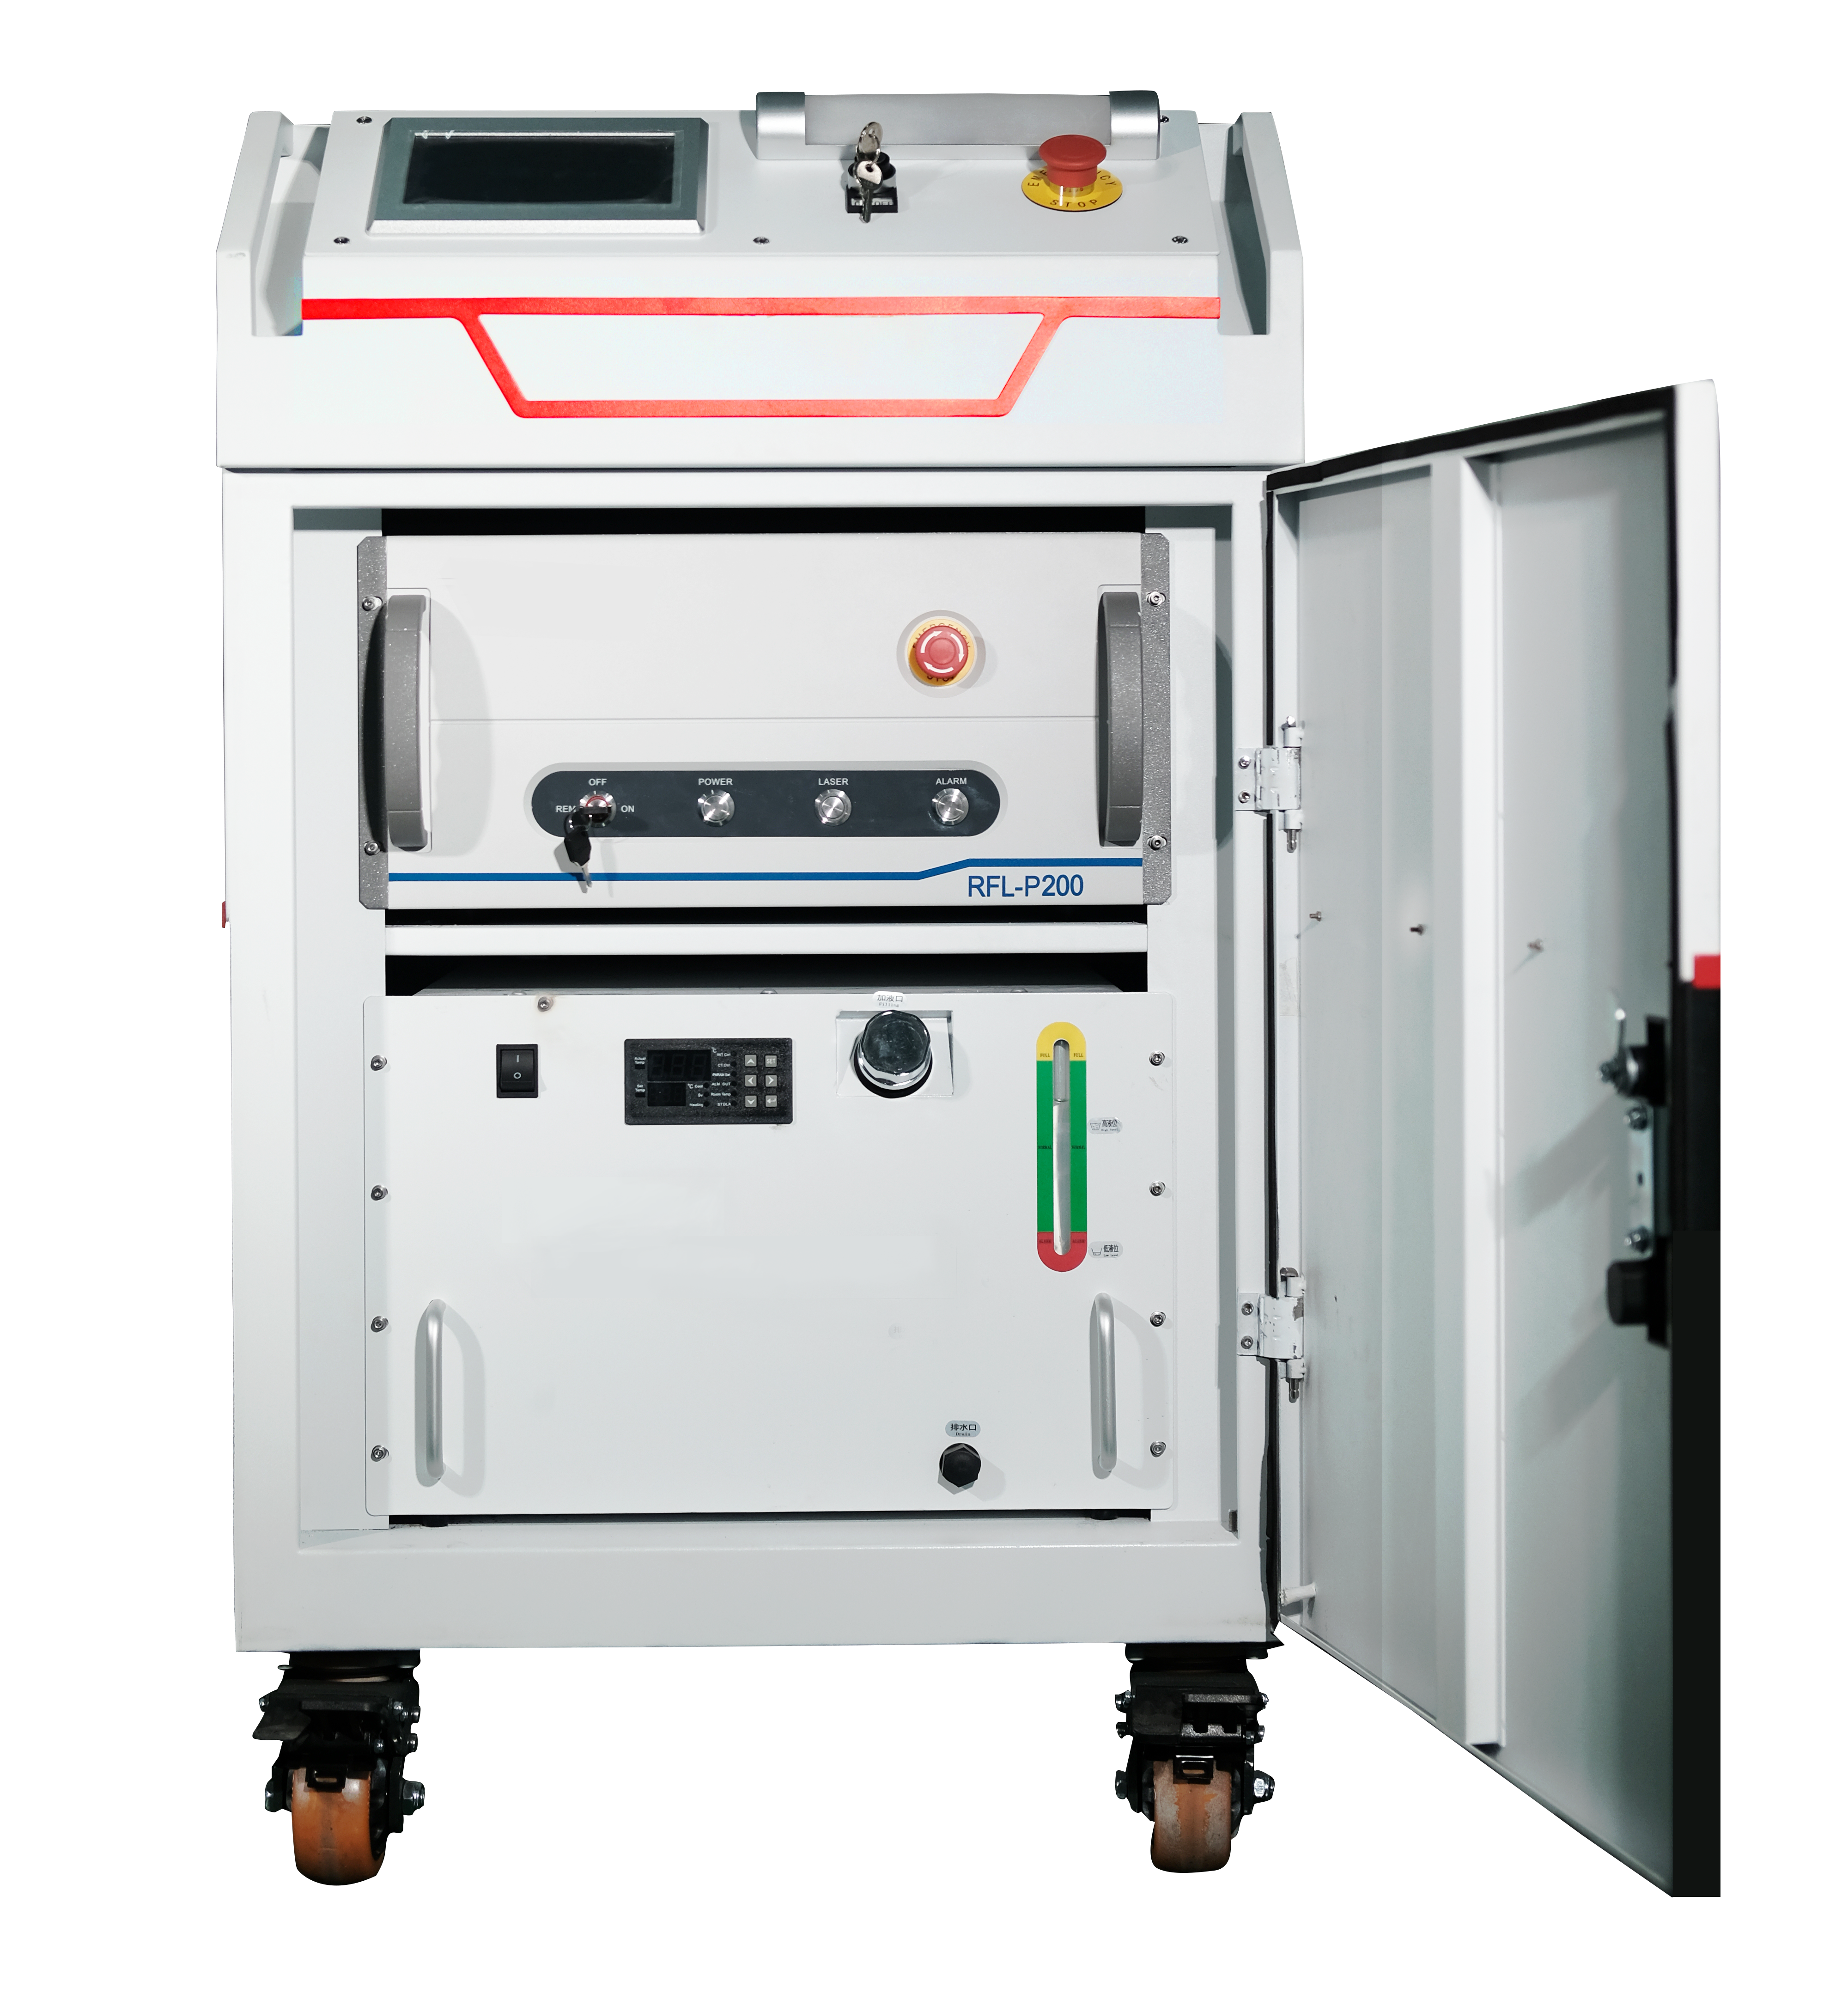 What are the safety precautions and guidelines for operating a laser cleaning machine?